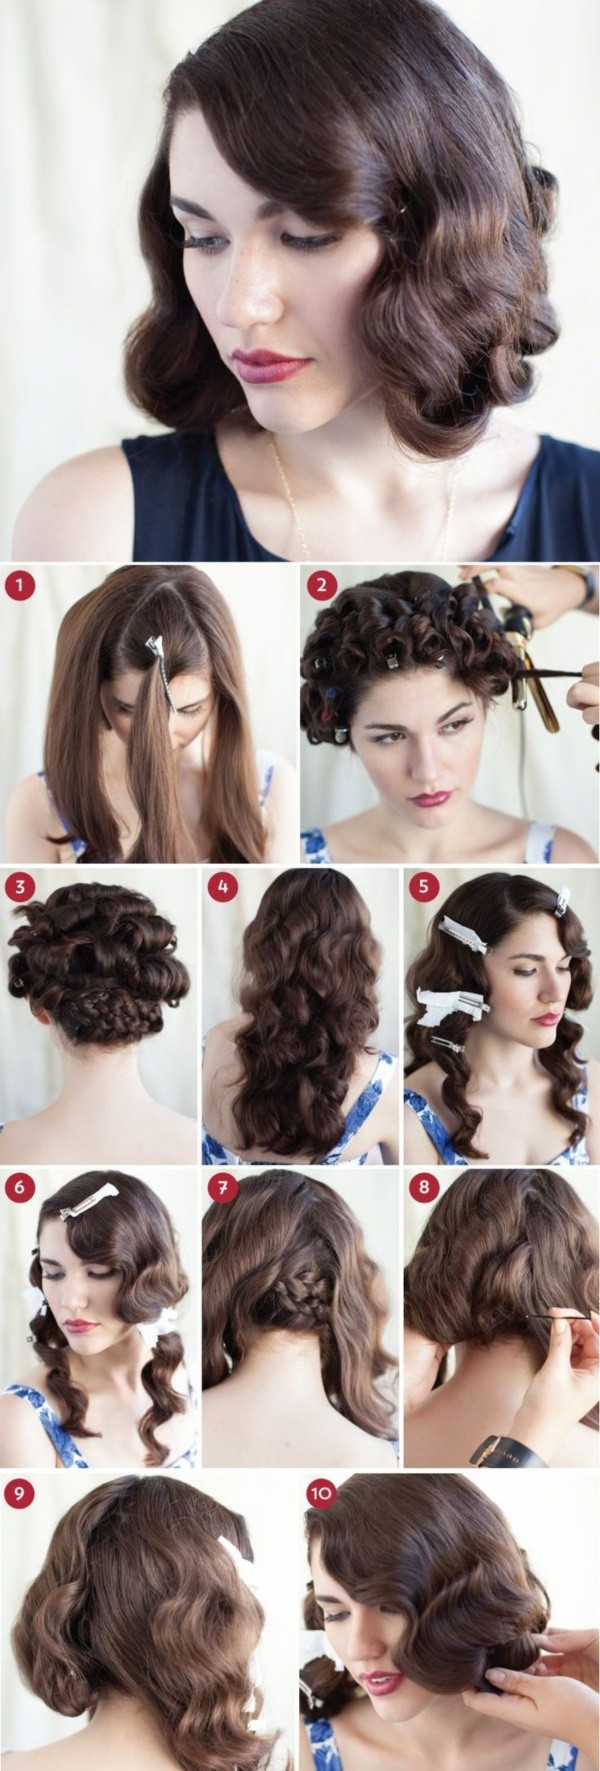 Easy DIY Updos For Long Hair
 101 Easy DIY Hairstyles for Medium and Long Hair to snatch